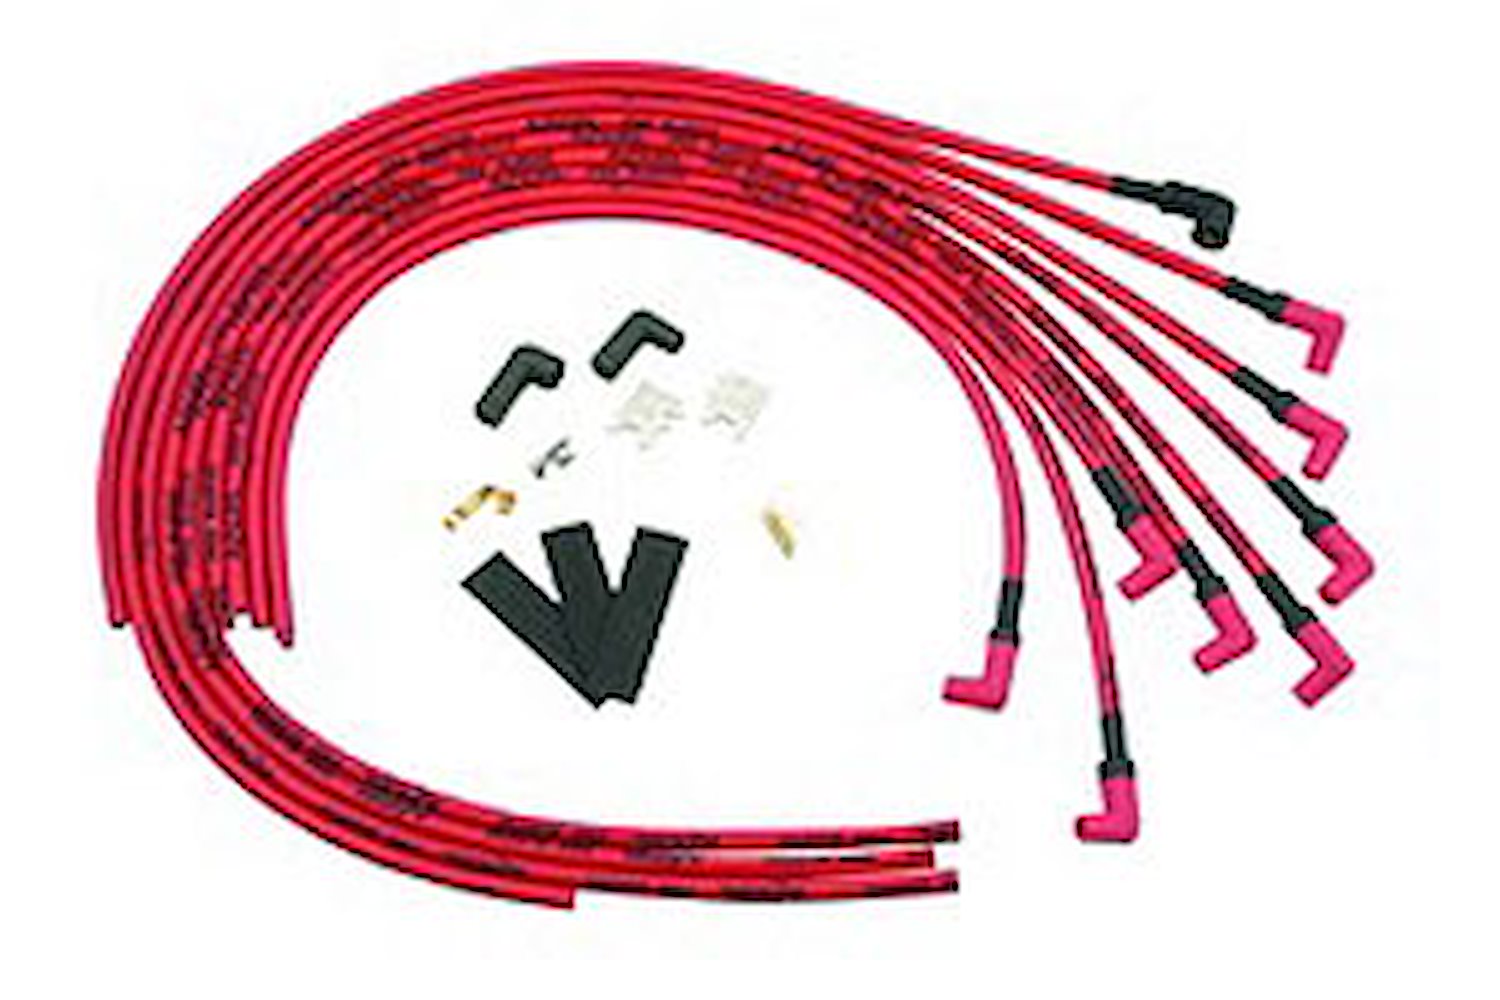 Pro 25 Race Spark Plug Wires 8.8MM Sleeved Universal Kit